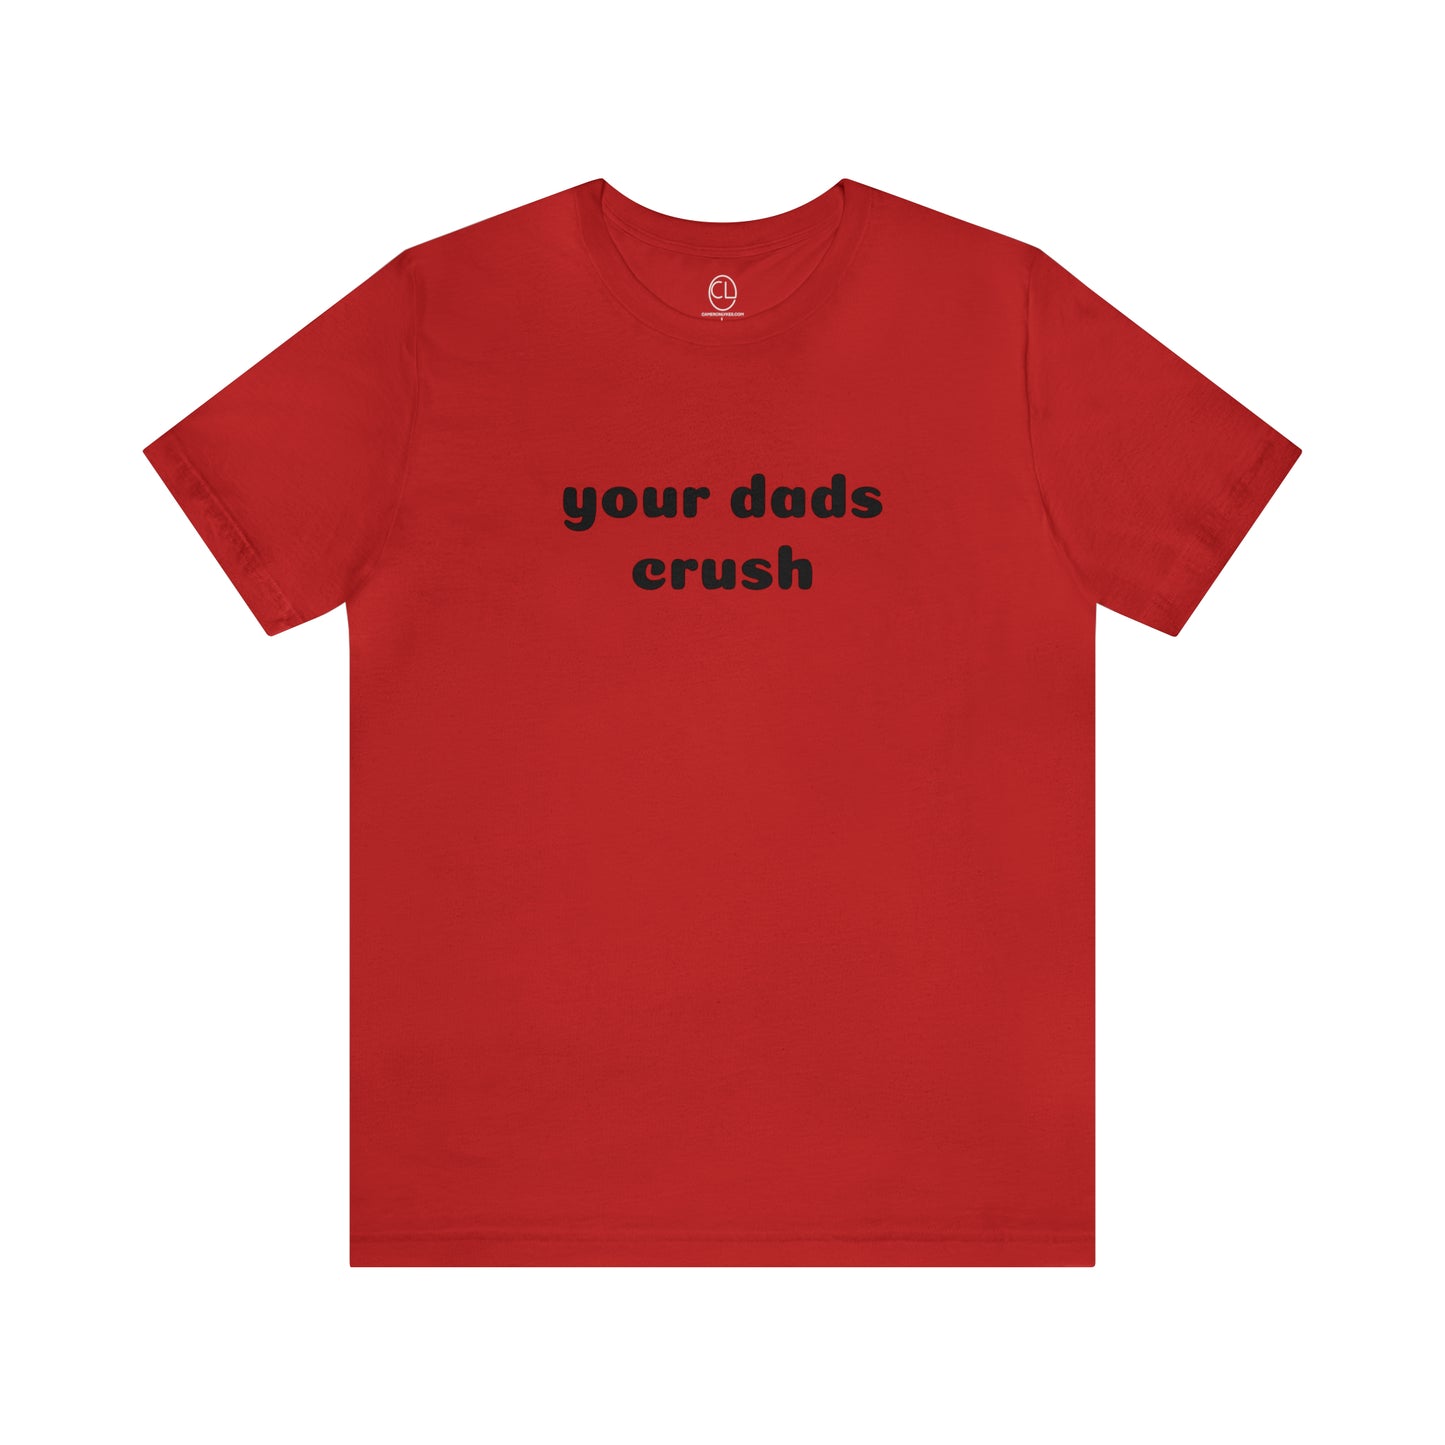 your dads crush tee